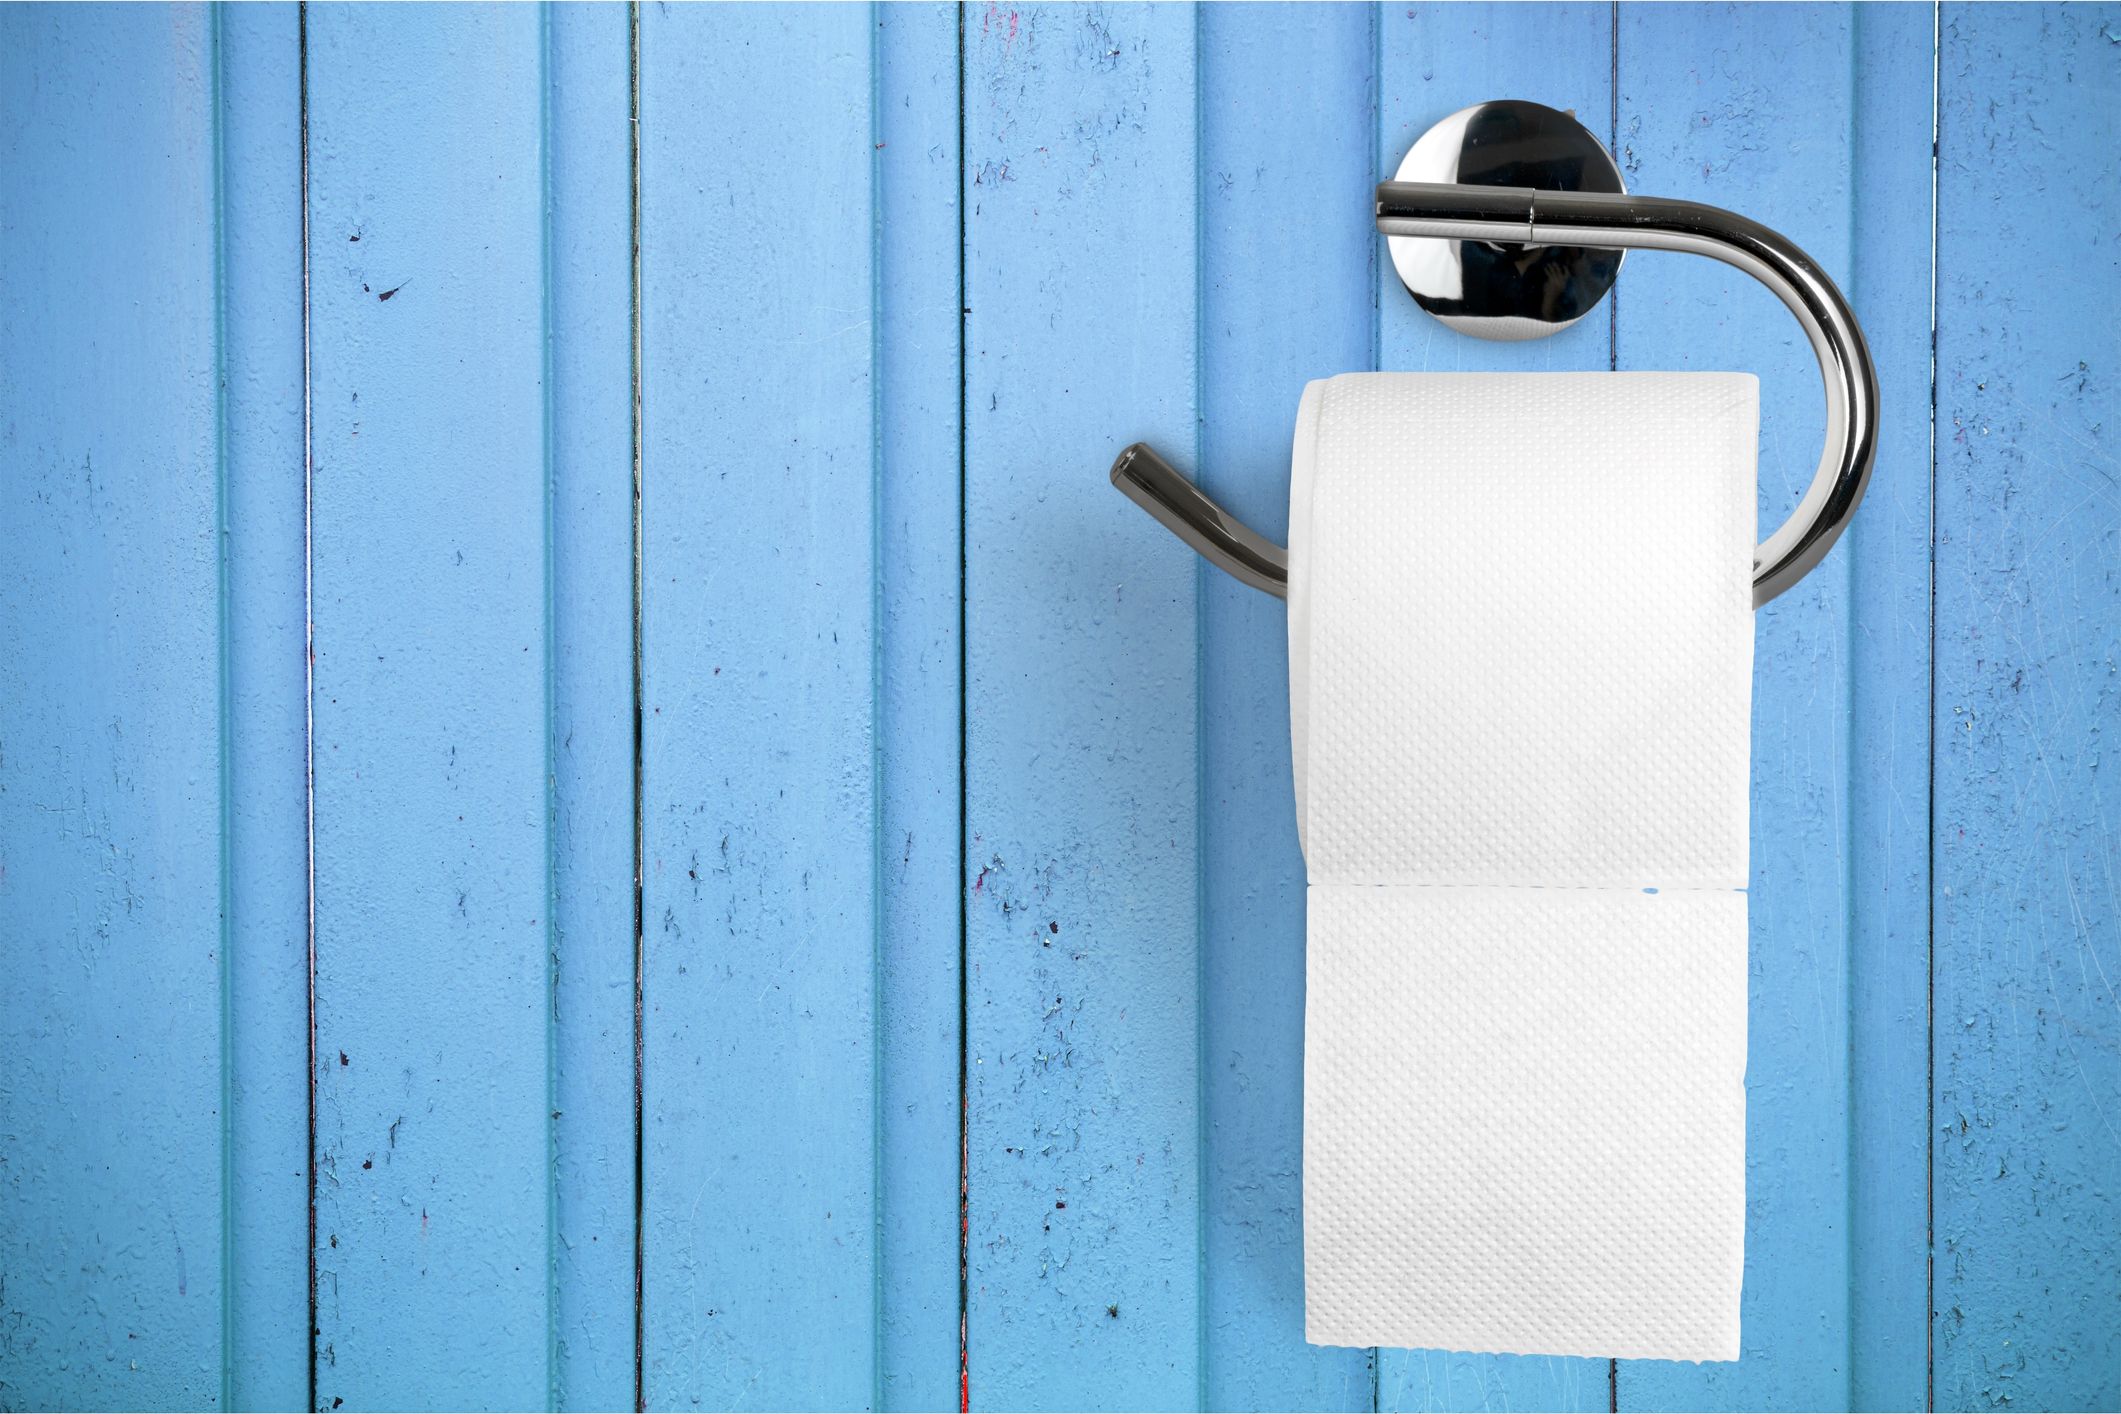 10 Reasons Why You Always Have to Pee, According to a Urogynecologist